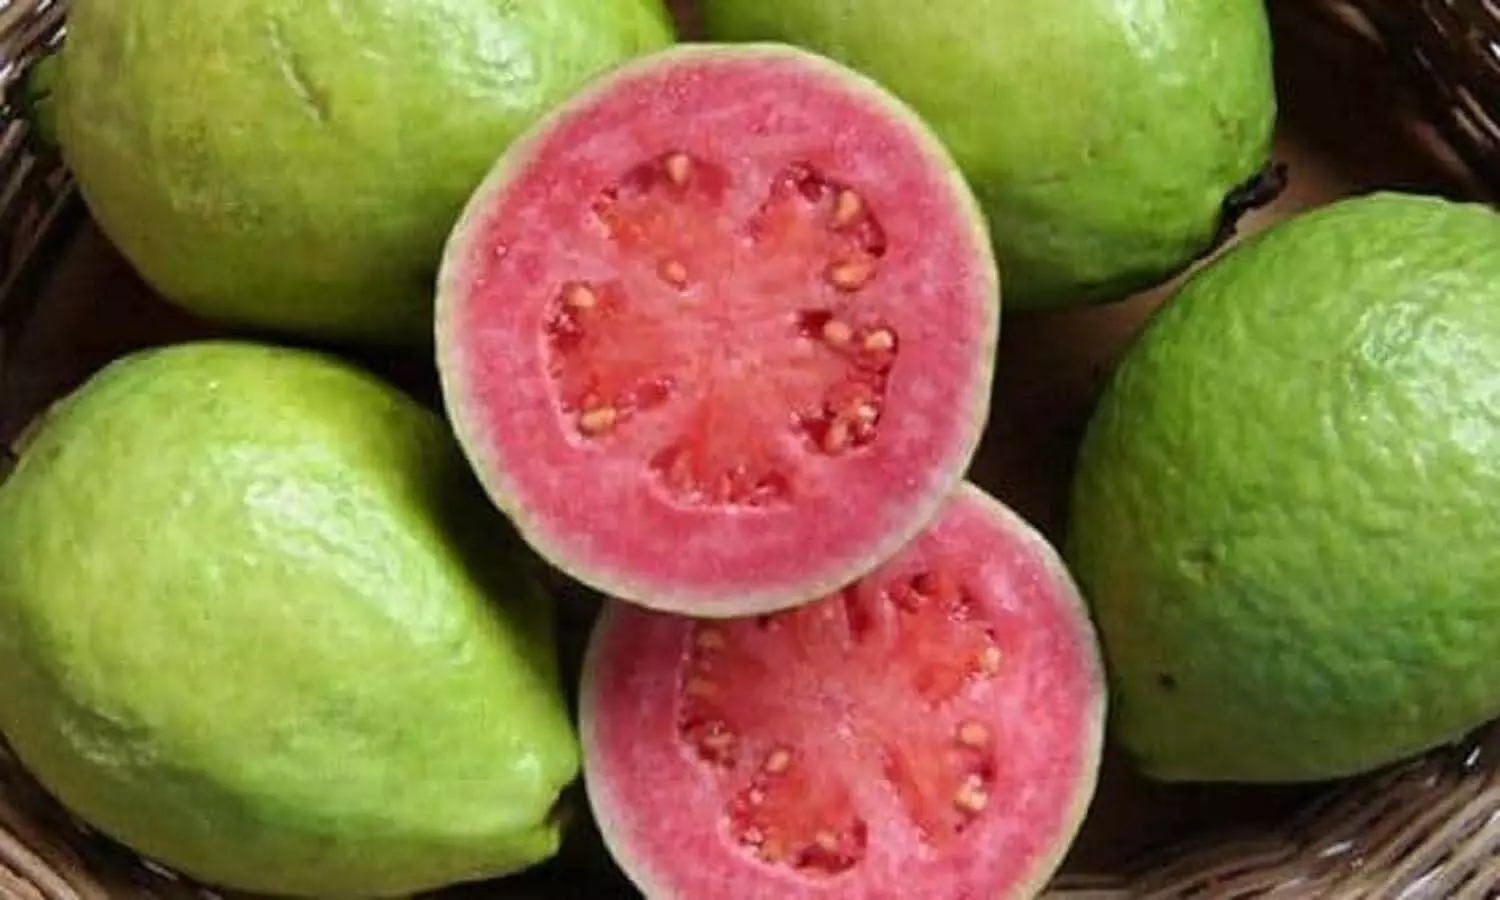 Yogi Government is trying to save the existence of Allahabadi Guava